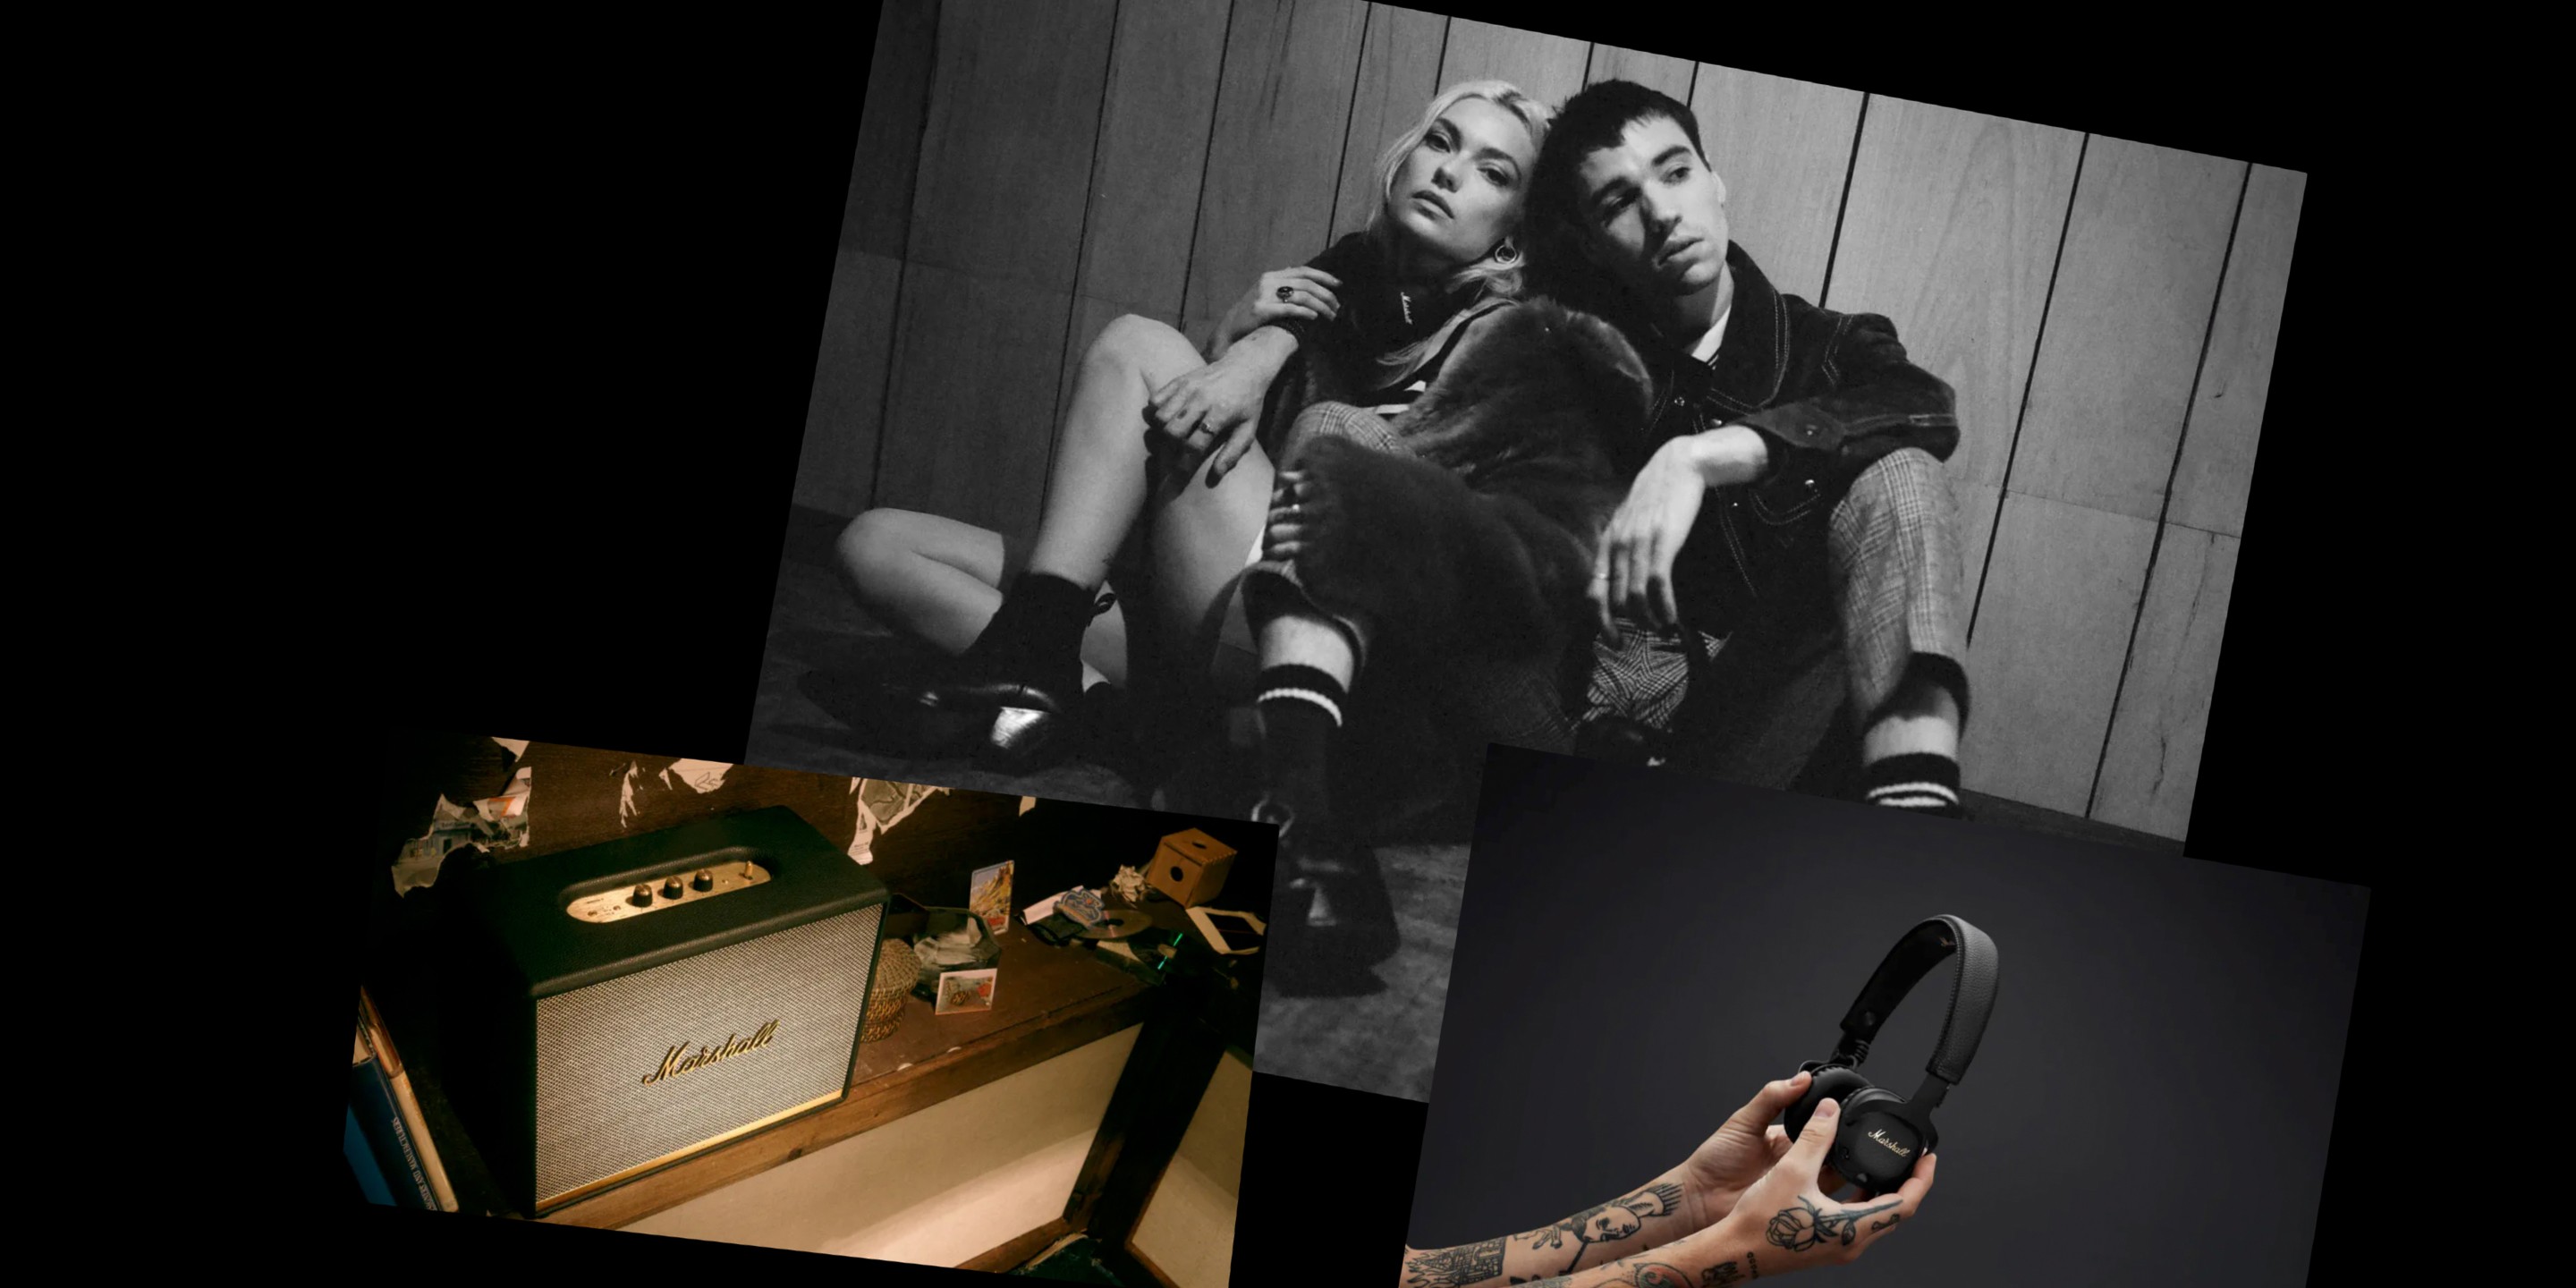 Collage of three photos showing a Marshall home speaker and a Marshall Black Headphone.